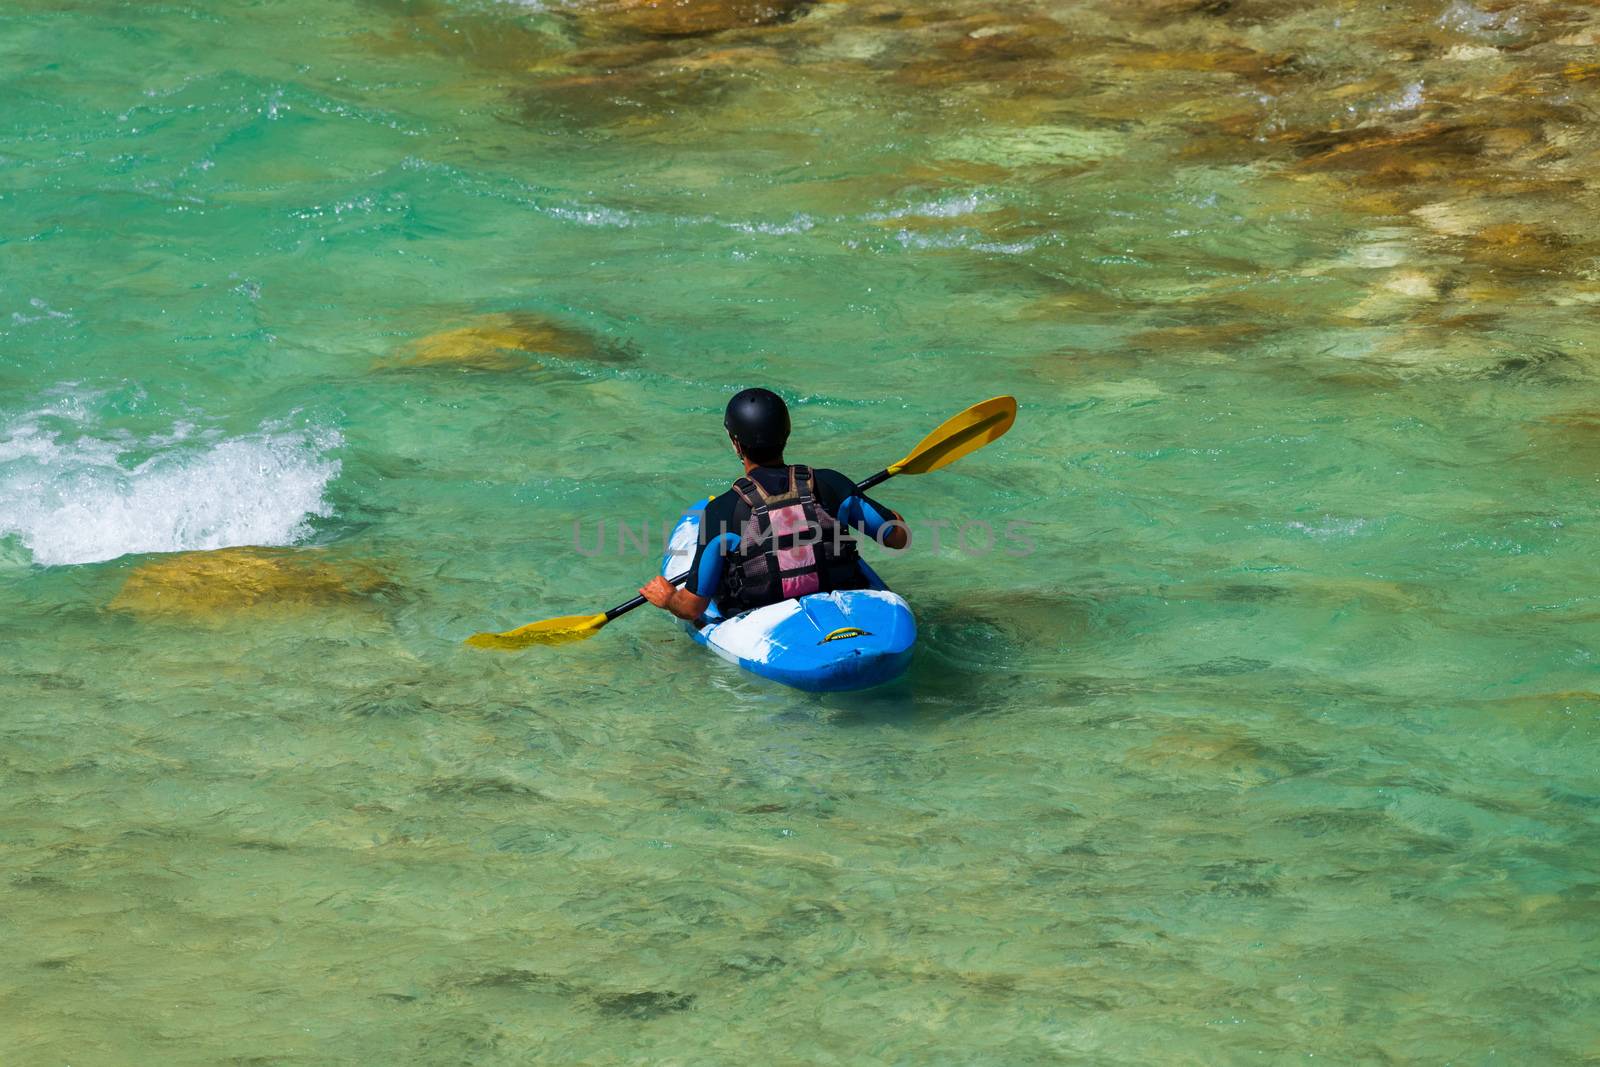 A man kayaking in emerald, turquoise mountain river by asafaric